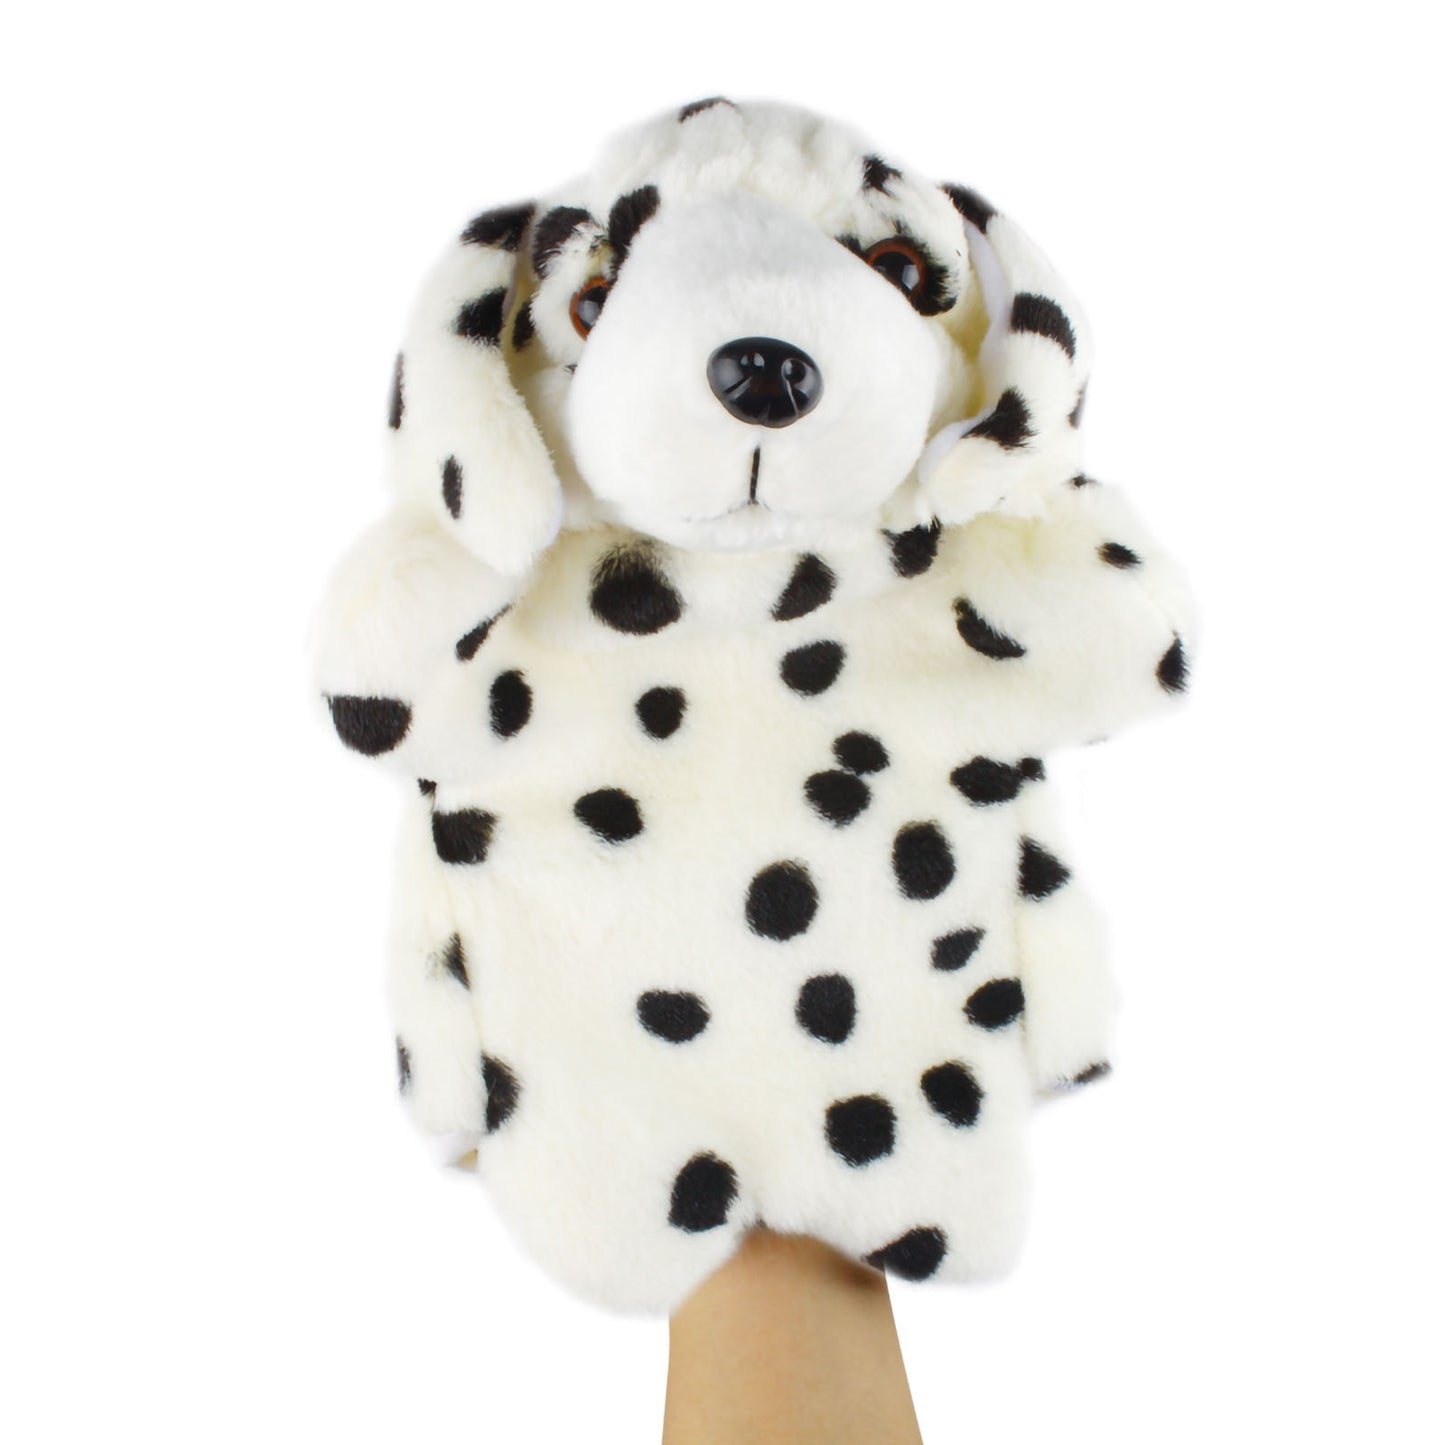 Andux Hand Puppet Soft Stuffed Animal Toy (SO-12 Dog-Spotted )